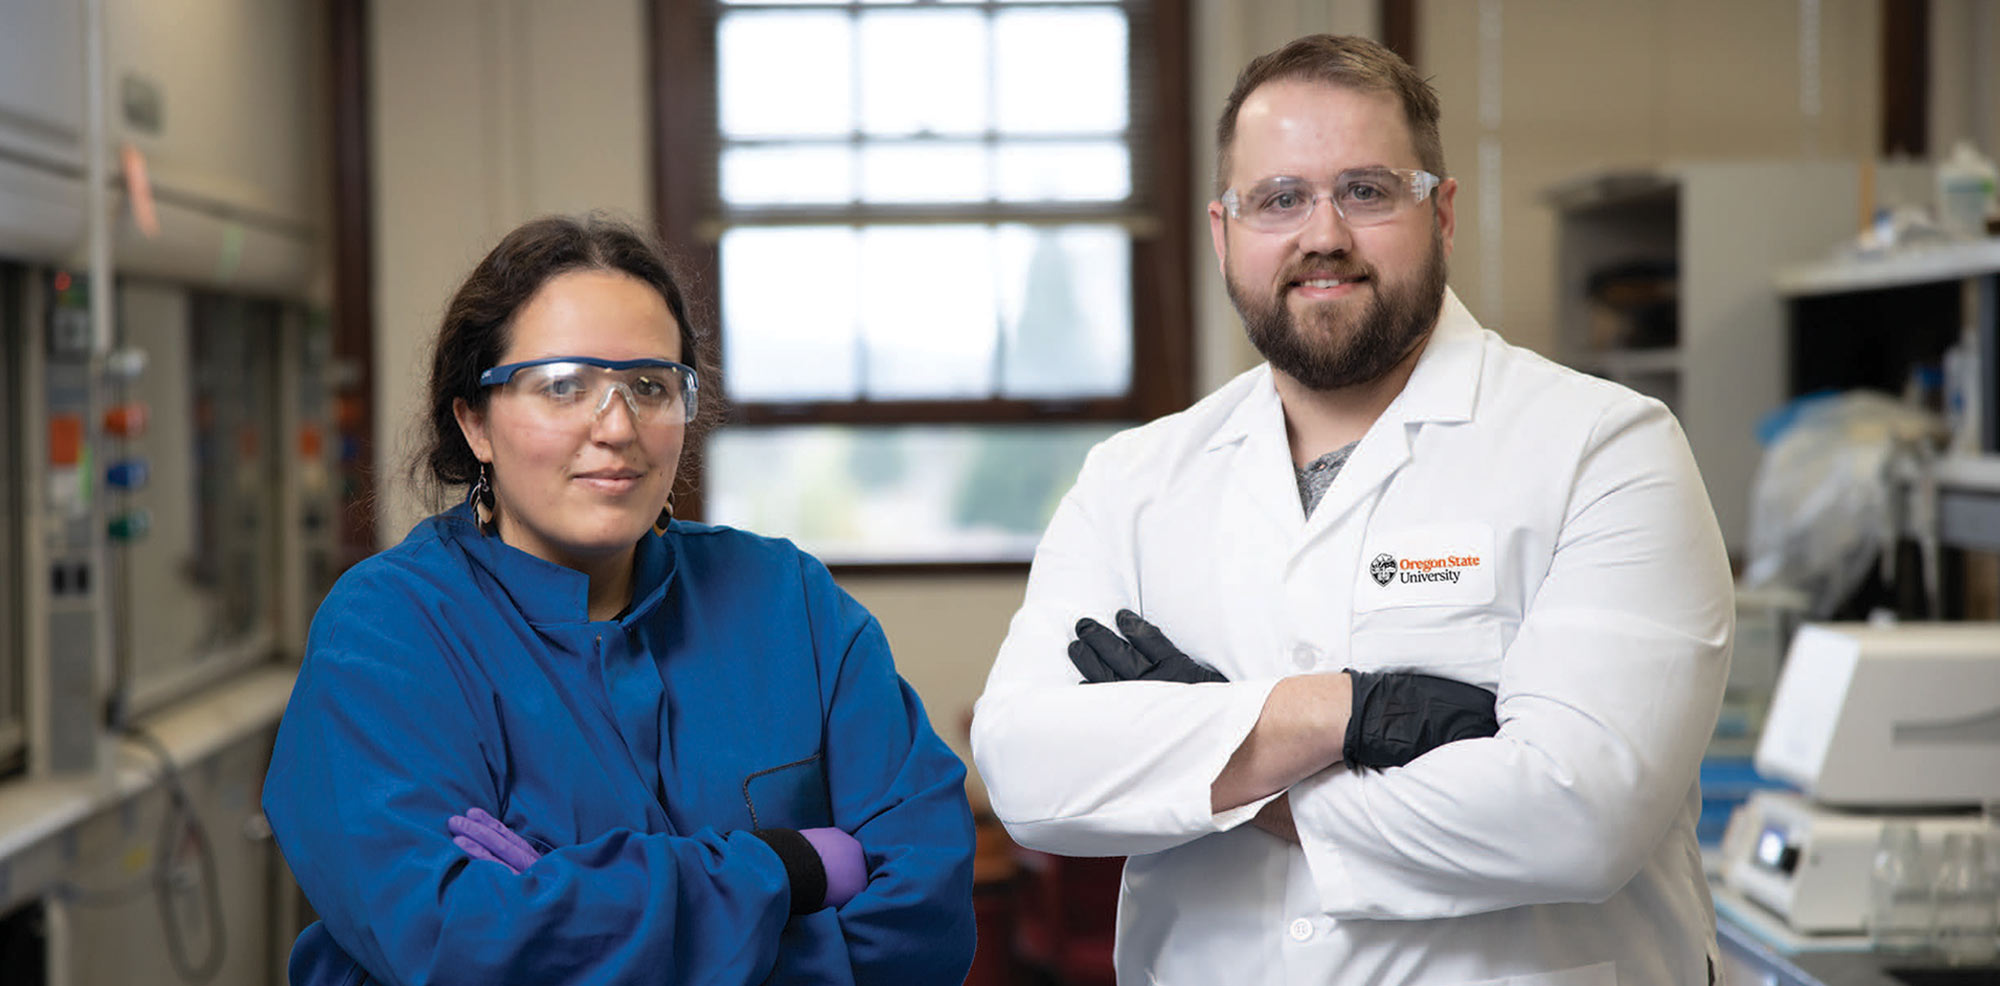 a woman wearing goggles and a blue jump suit stands beside a man wearing goggles and an Oregon State University lab coat, both with their arms folded and smiling while standing in a lab